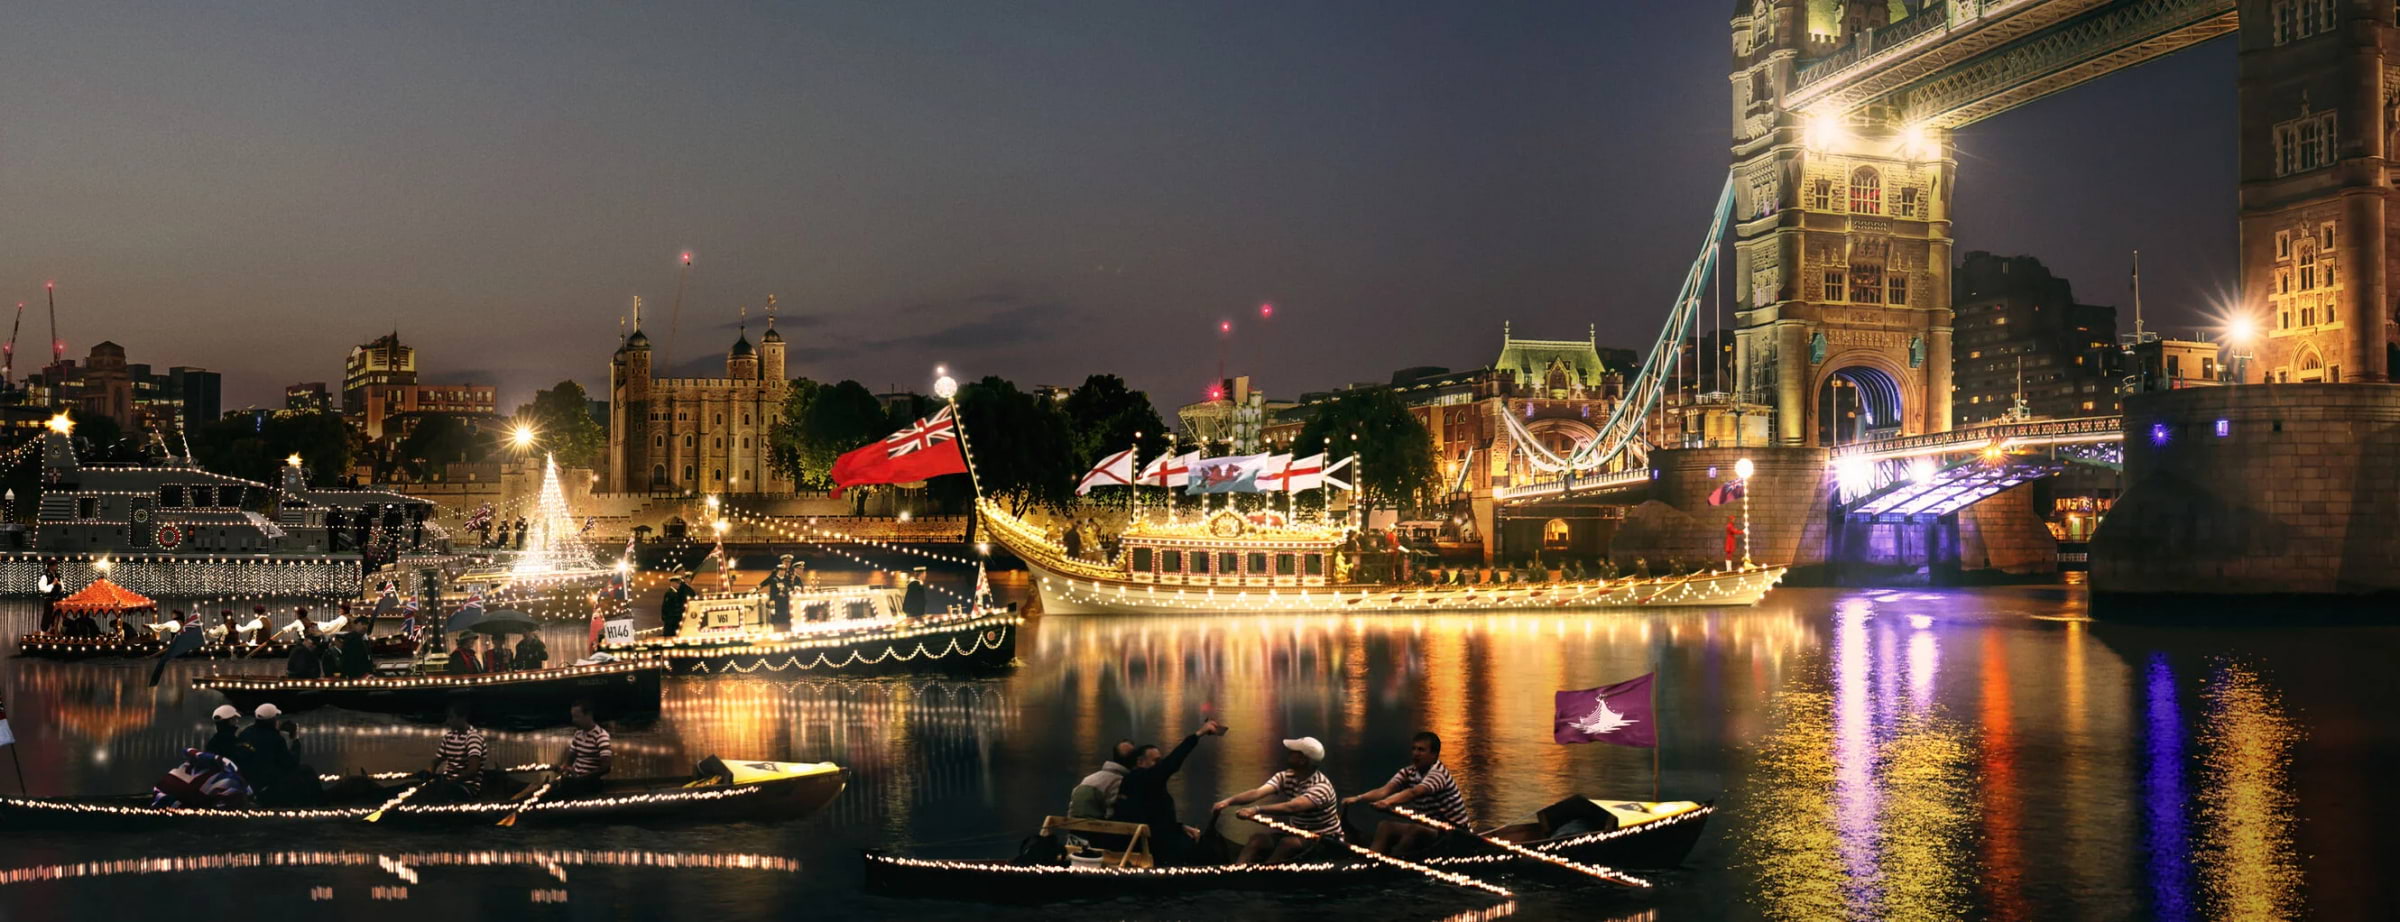 Learn about London's main river at Totally Thames Festival